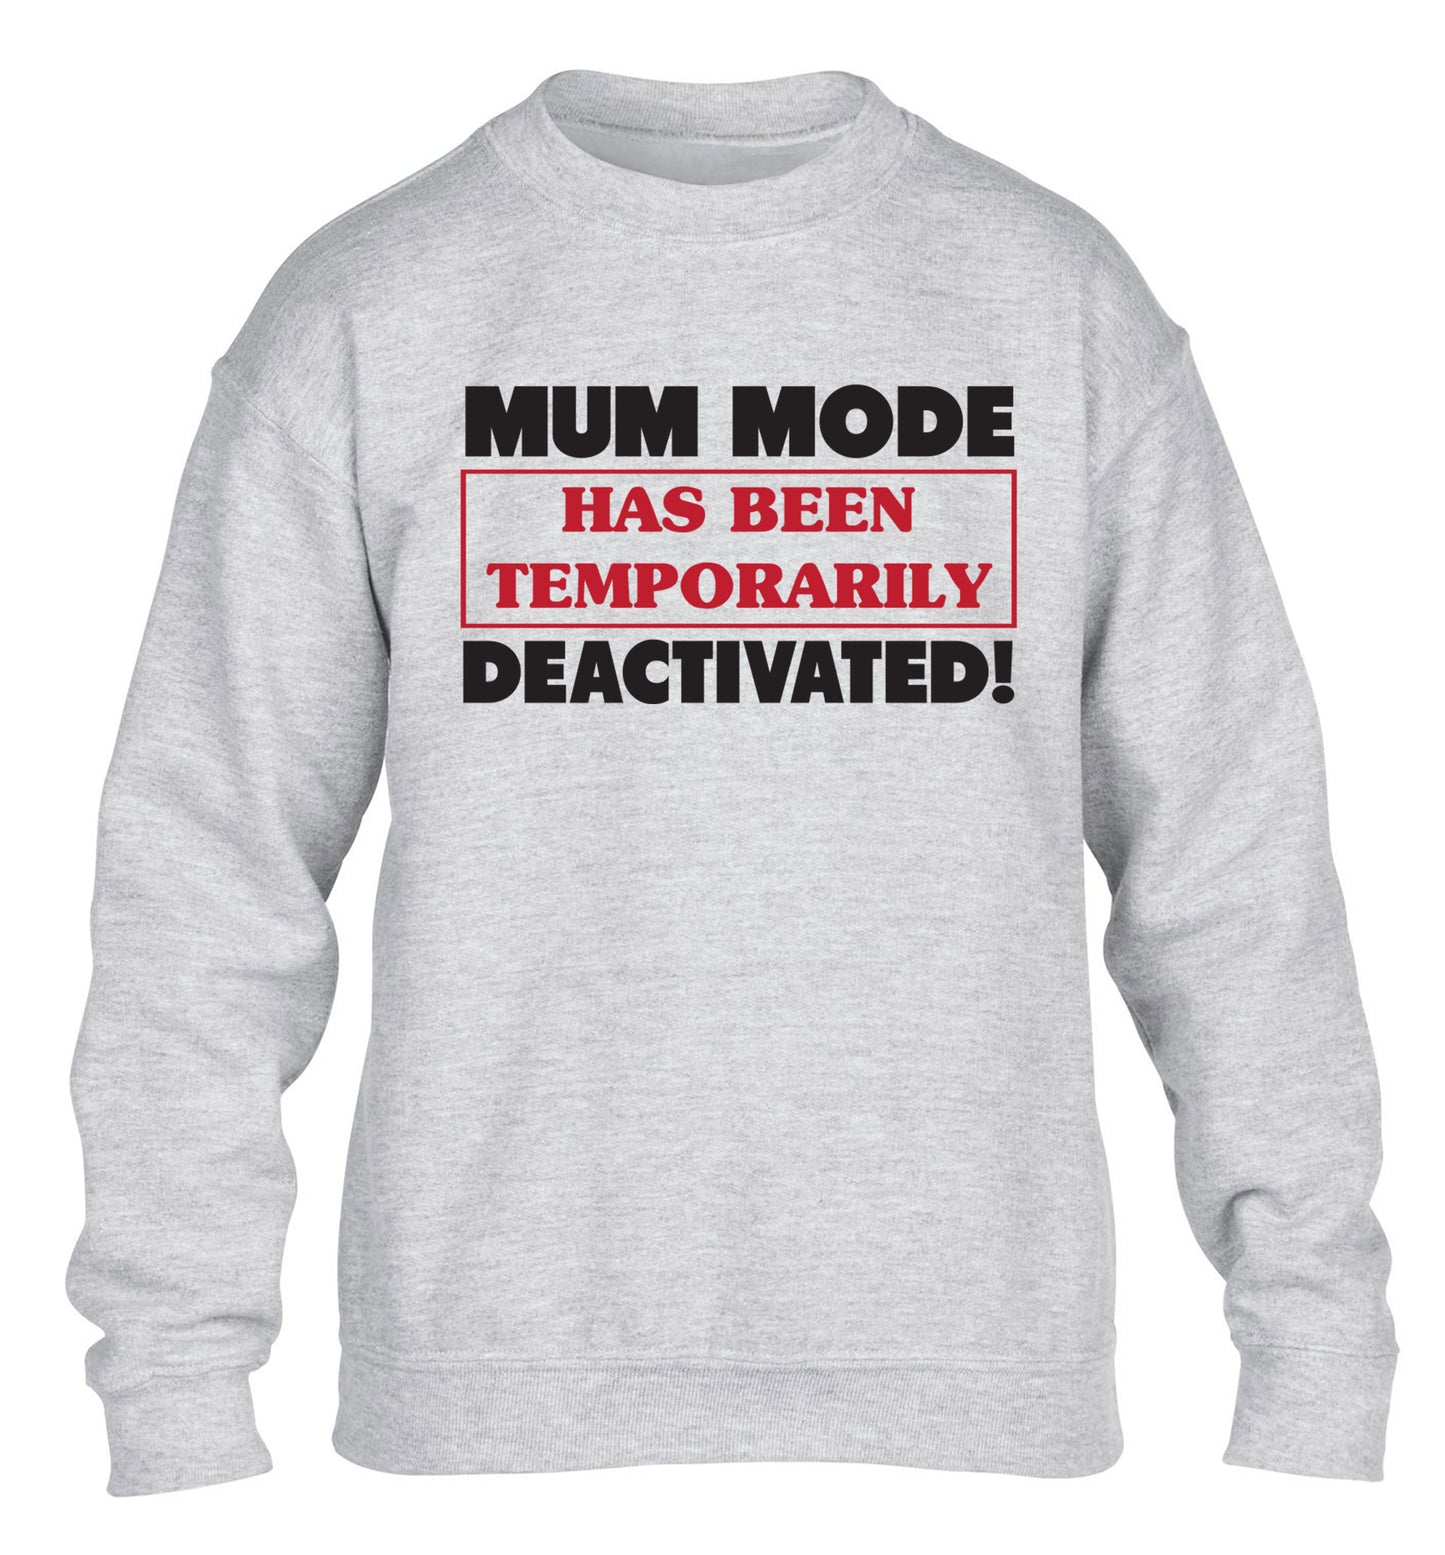 Mum mode has been temporarily deactivated! children's grey sweater 12-13 Years